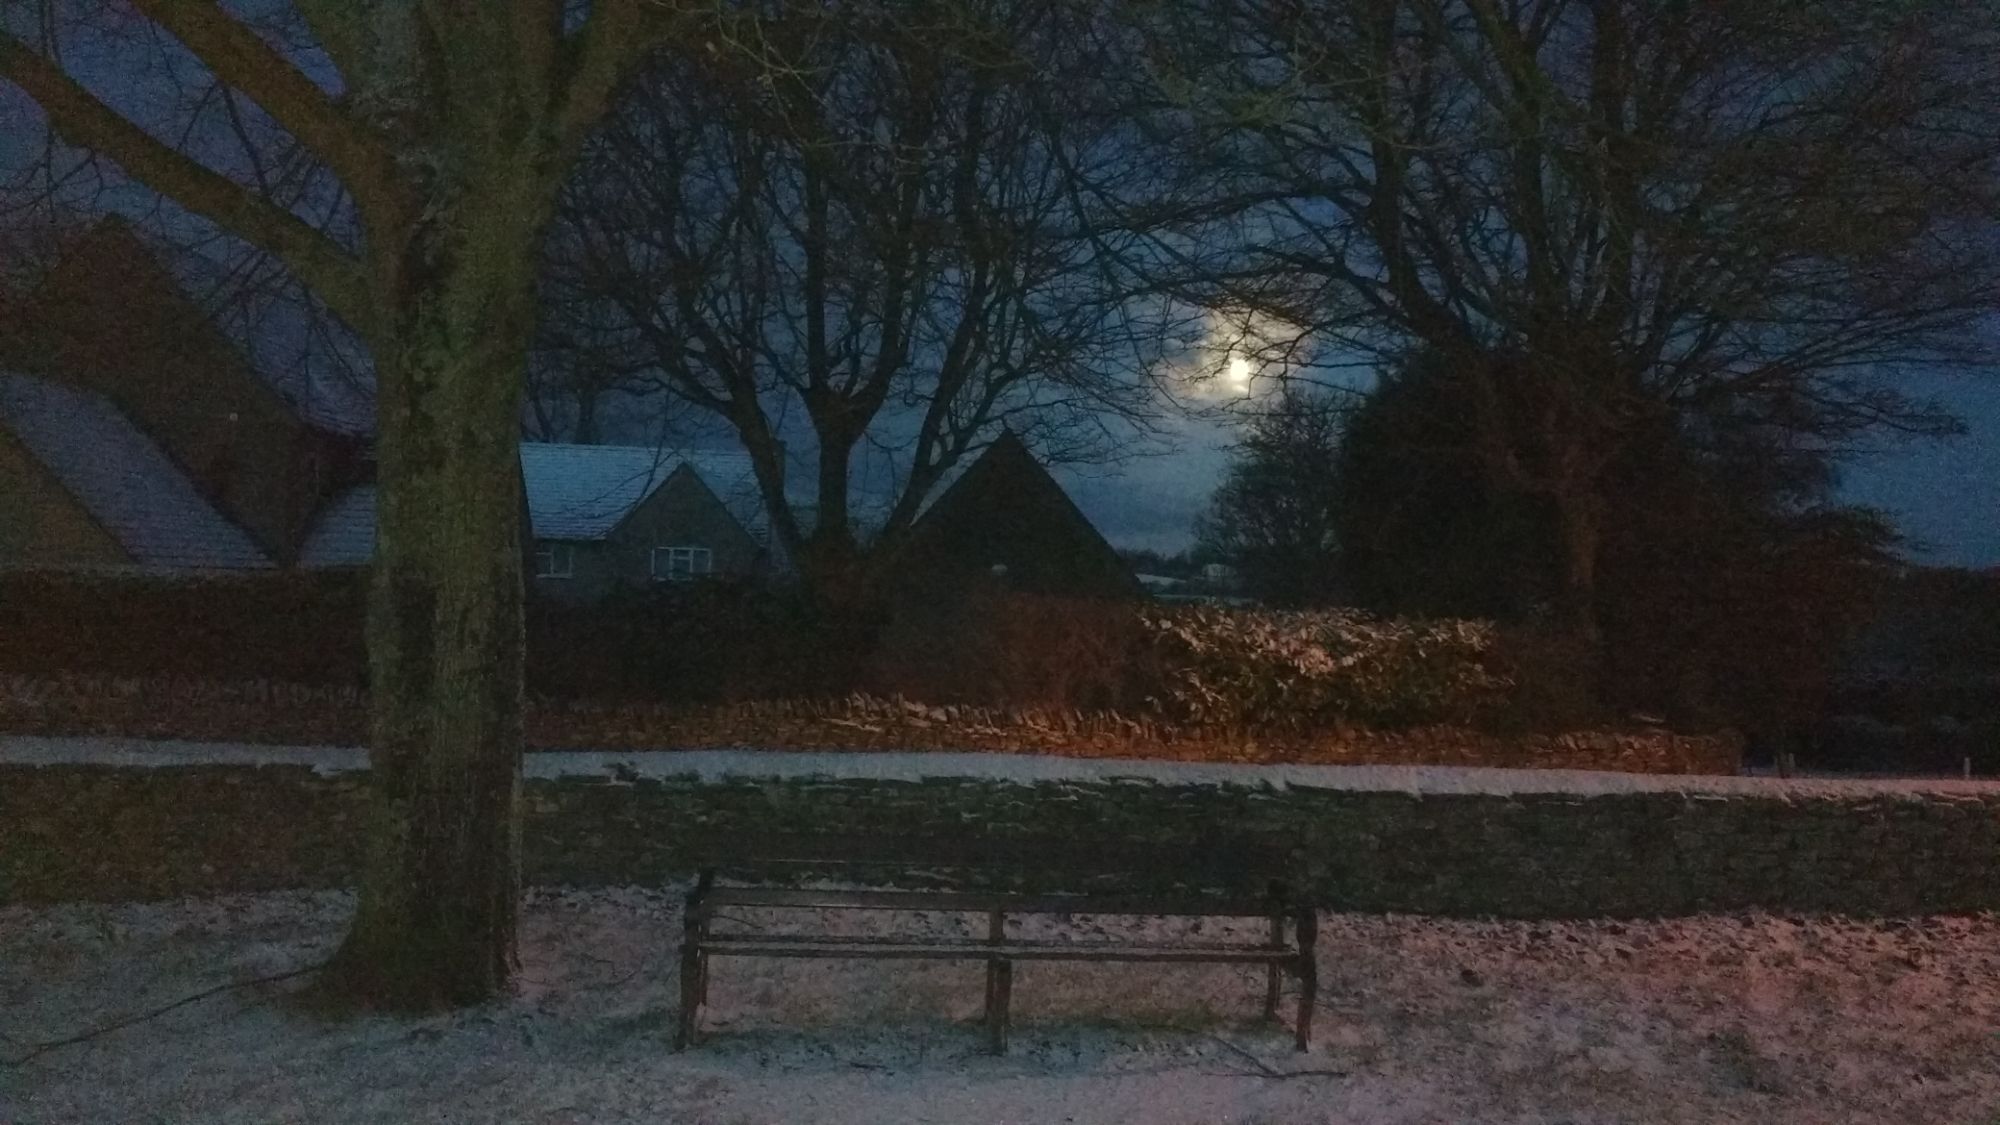 Full moon and evocative weather